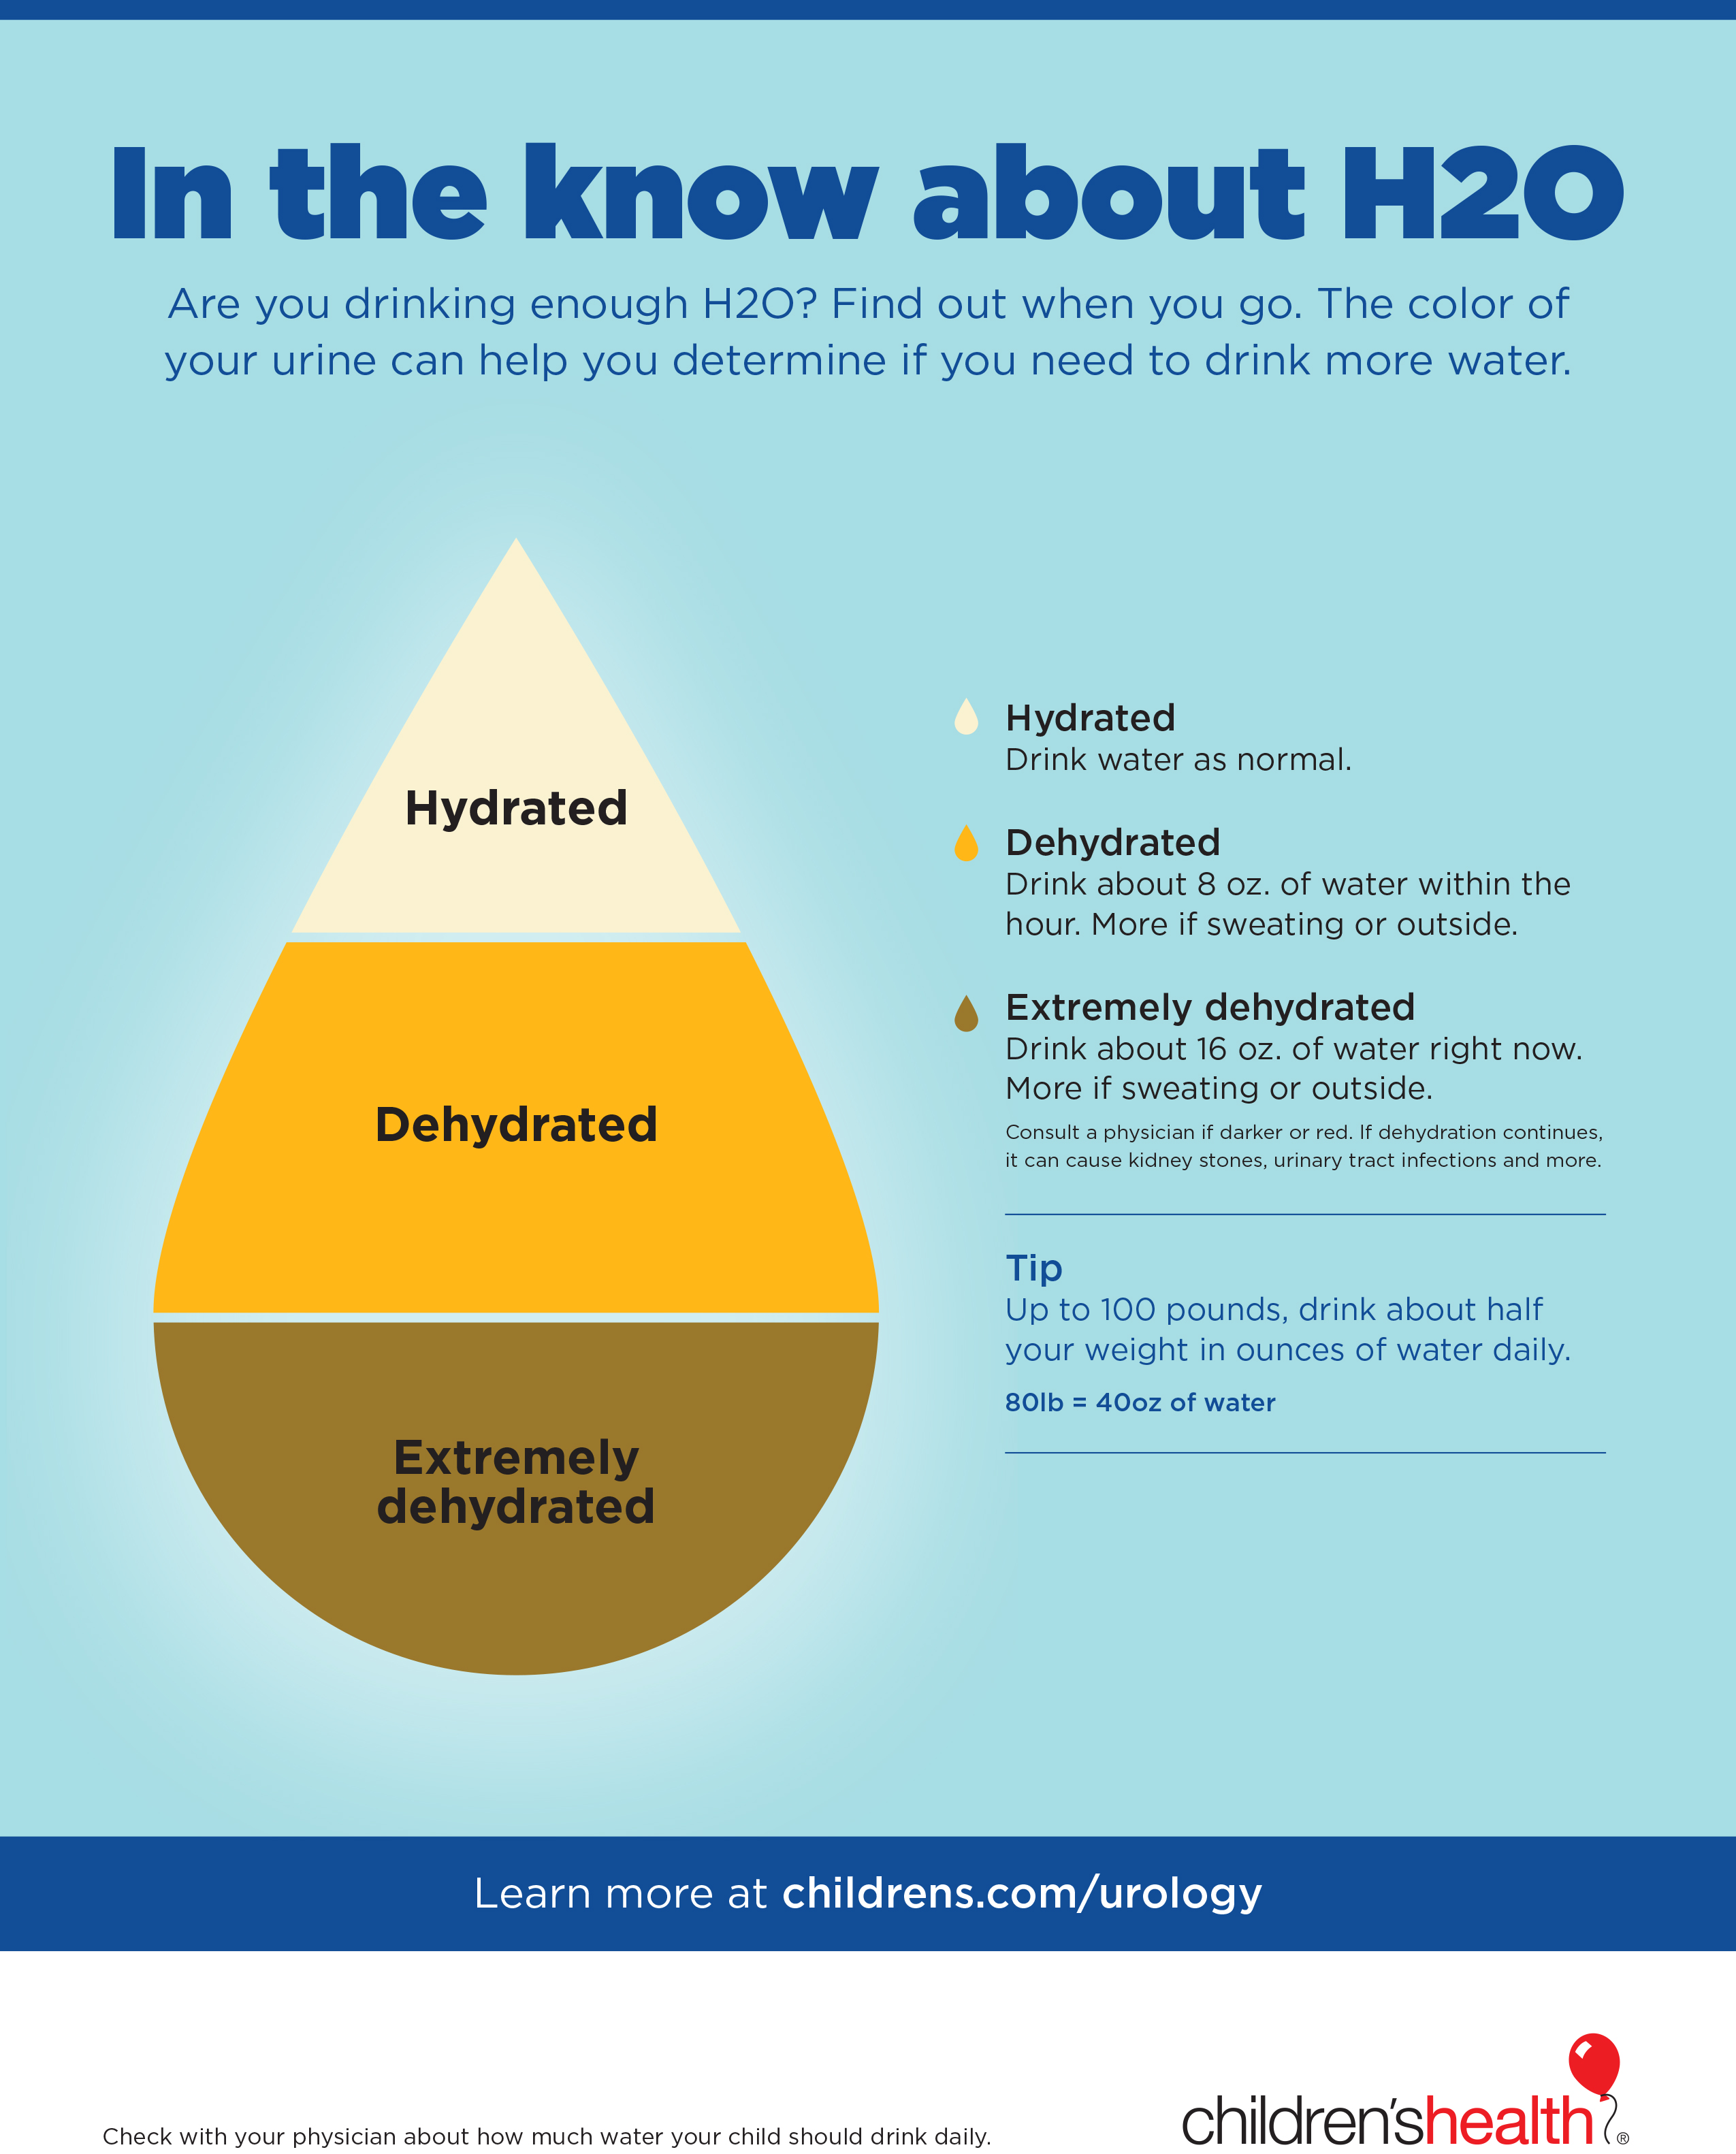 How to Keep Kids Hydrated  Children's Hospital of Philadelphia